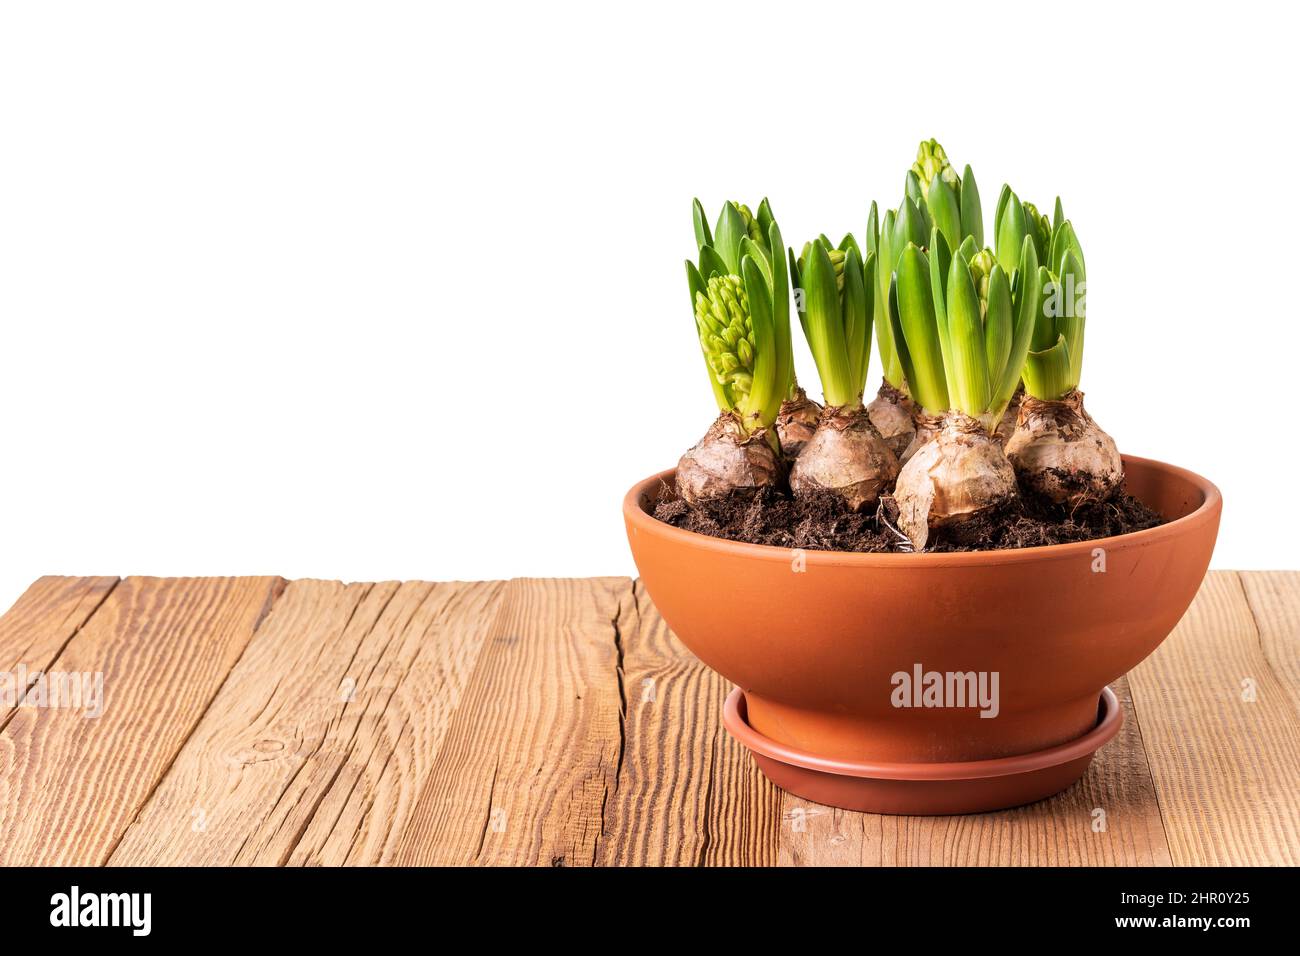 Hyacinths with buds growing in terracotta flower pot on rustic wooden table isolated against white background. Spring flowers design template. Stock Photo